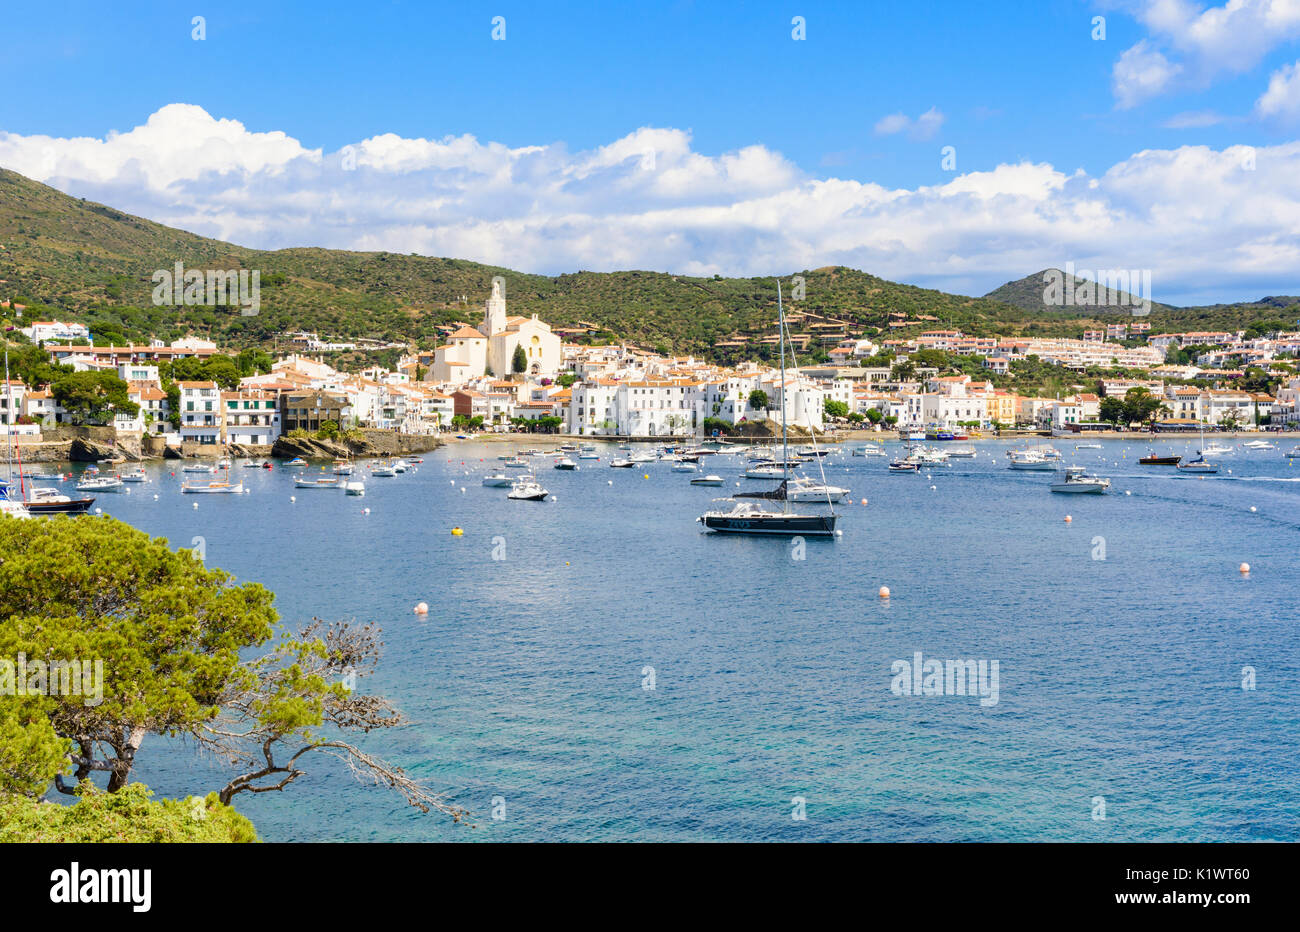 Whitewashed Cadaqués Town, topped by the Church of Santa Maria overlooking boats in the blue waters of Cadaqués Bay, Catalonia, Spain Stock Photo